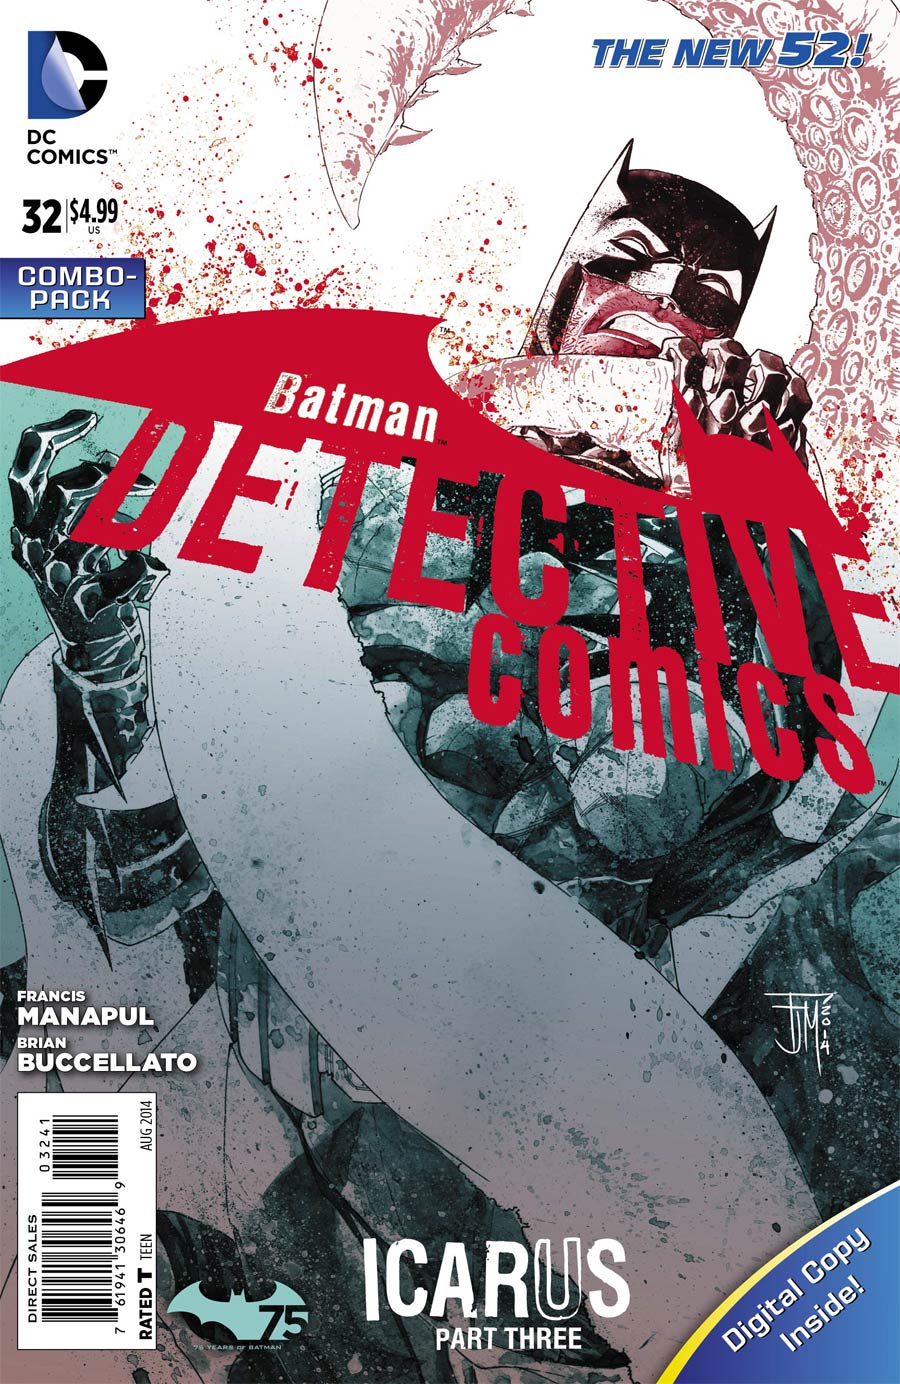 Detective Comics Vol 2 #32 Cover D Combo Pack Without Polybag